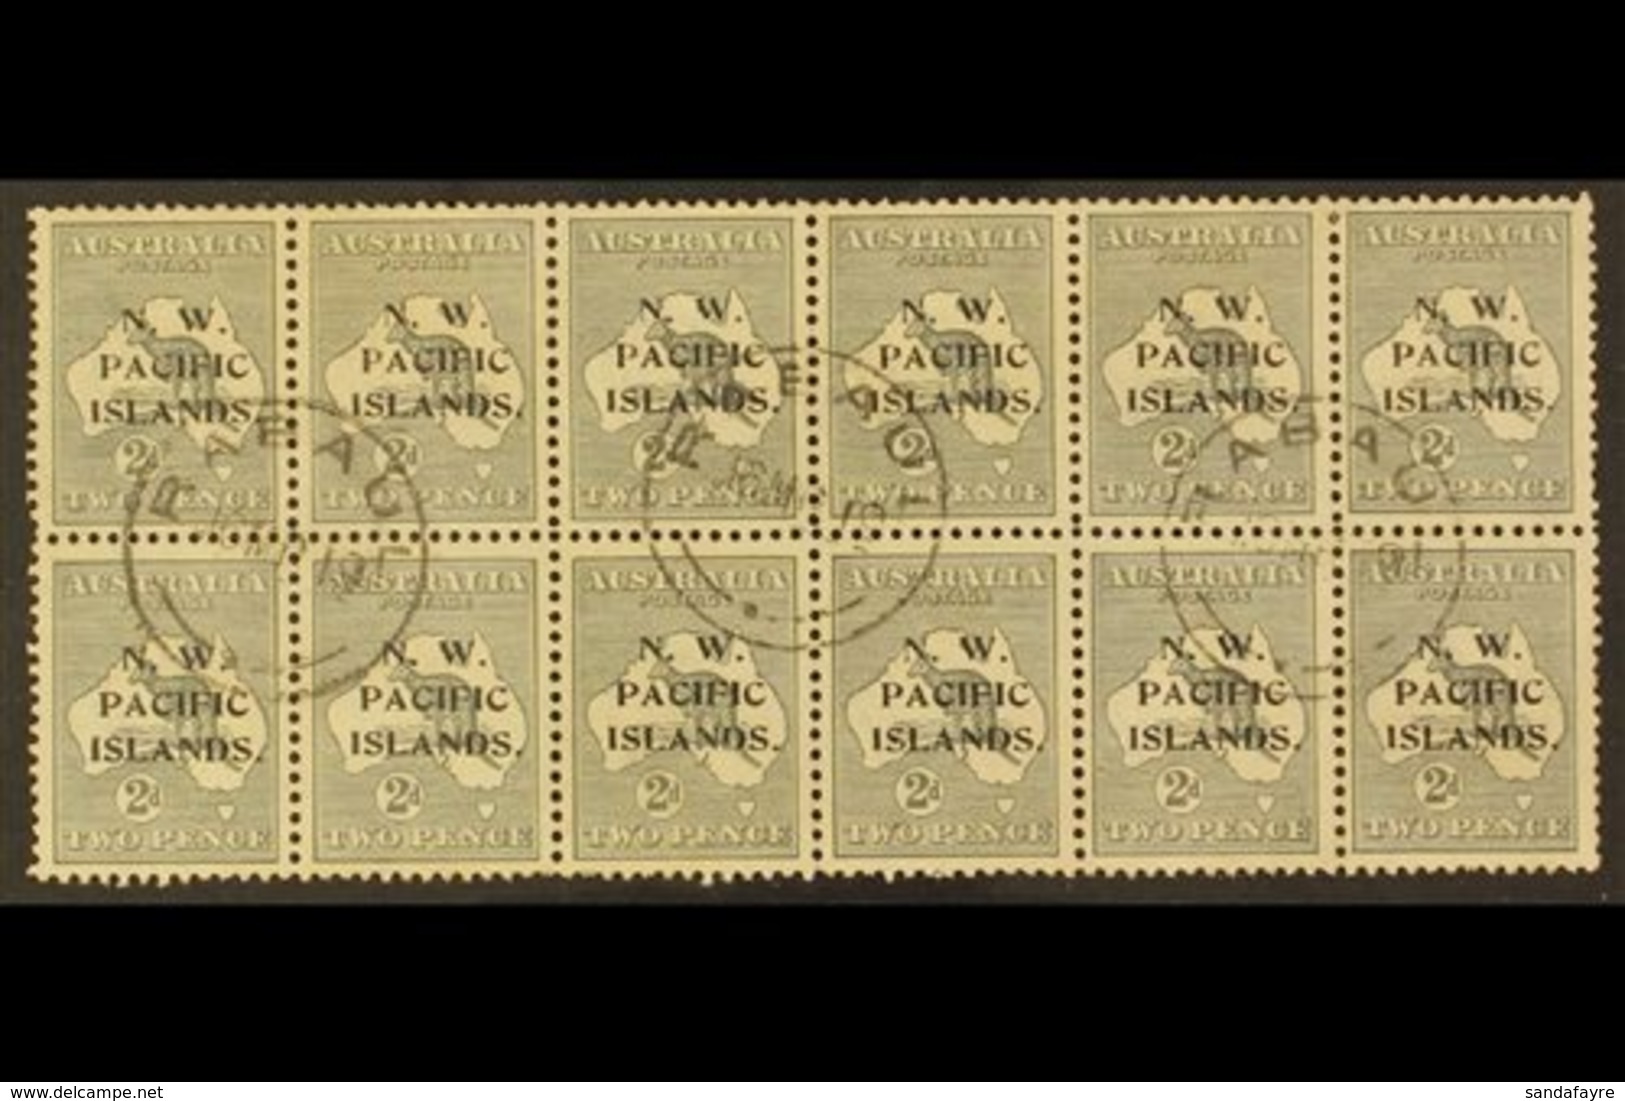 NWPI 1918-22 2d Grey Roo Die II Overprint, SG 106a, Fine Cds Used Very Rare BLOCK Of 12 (6x2) Cancelled By "Rabaul" Cds' - Papua New Guinea